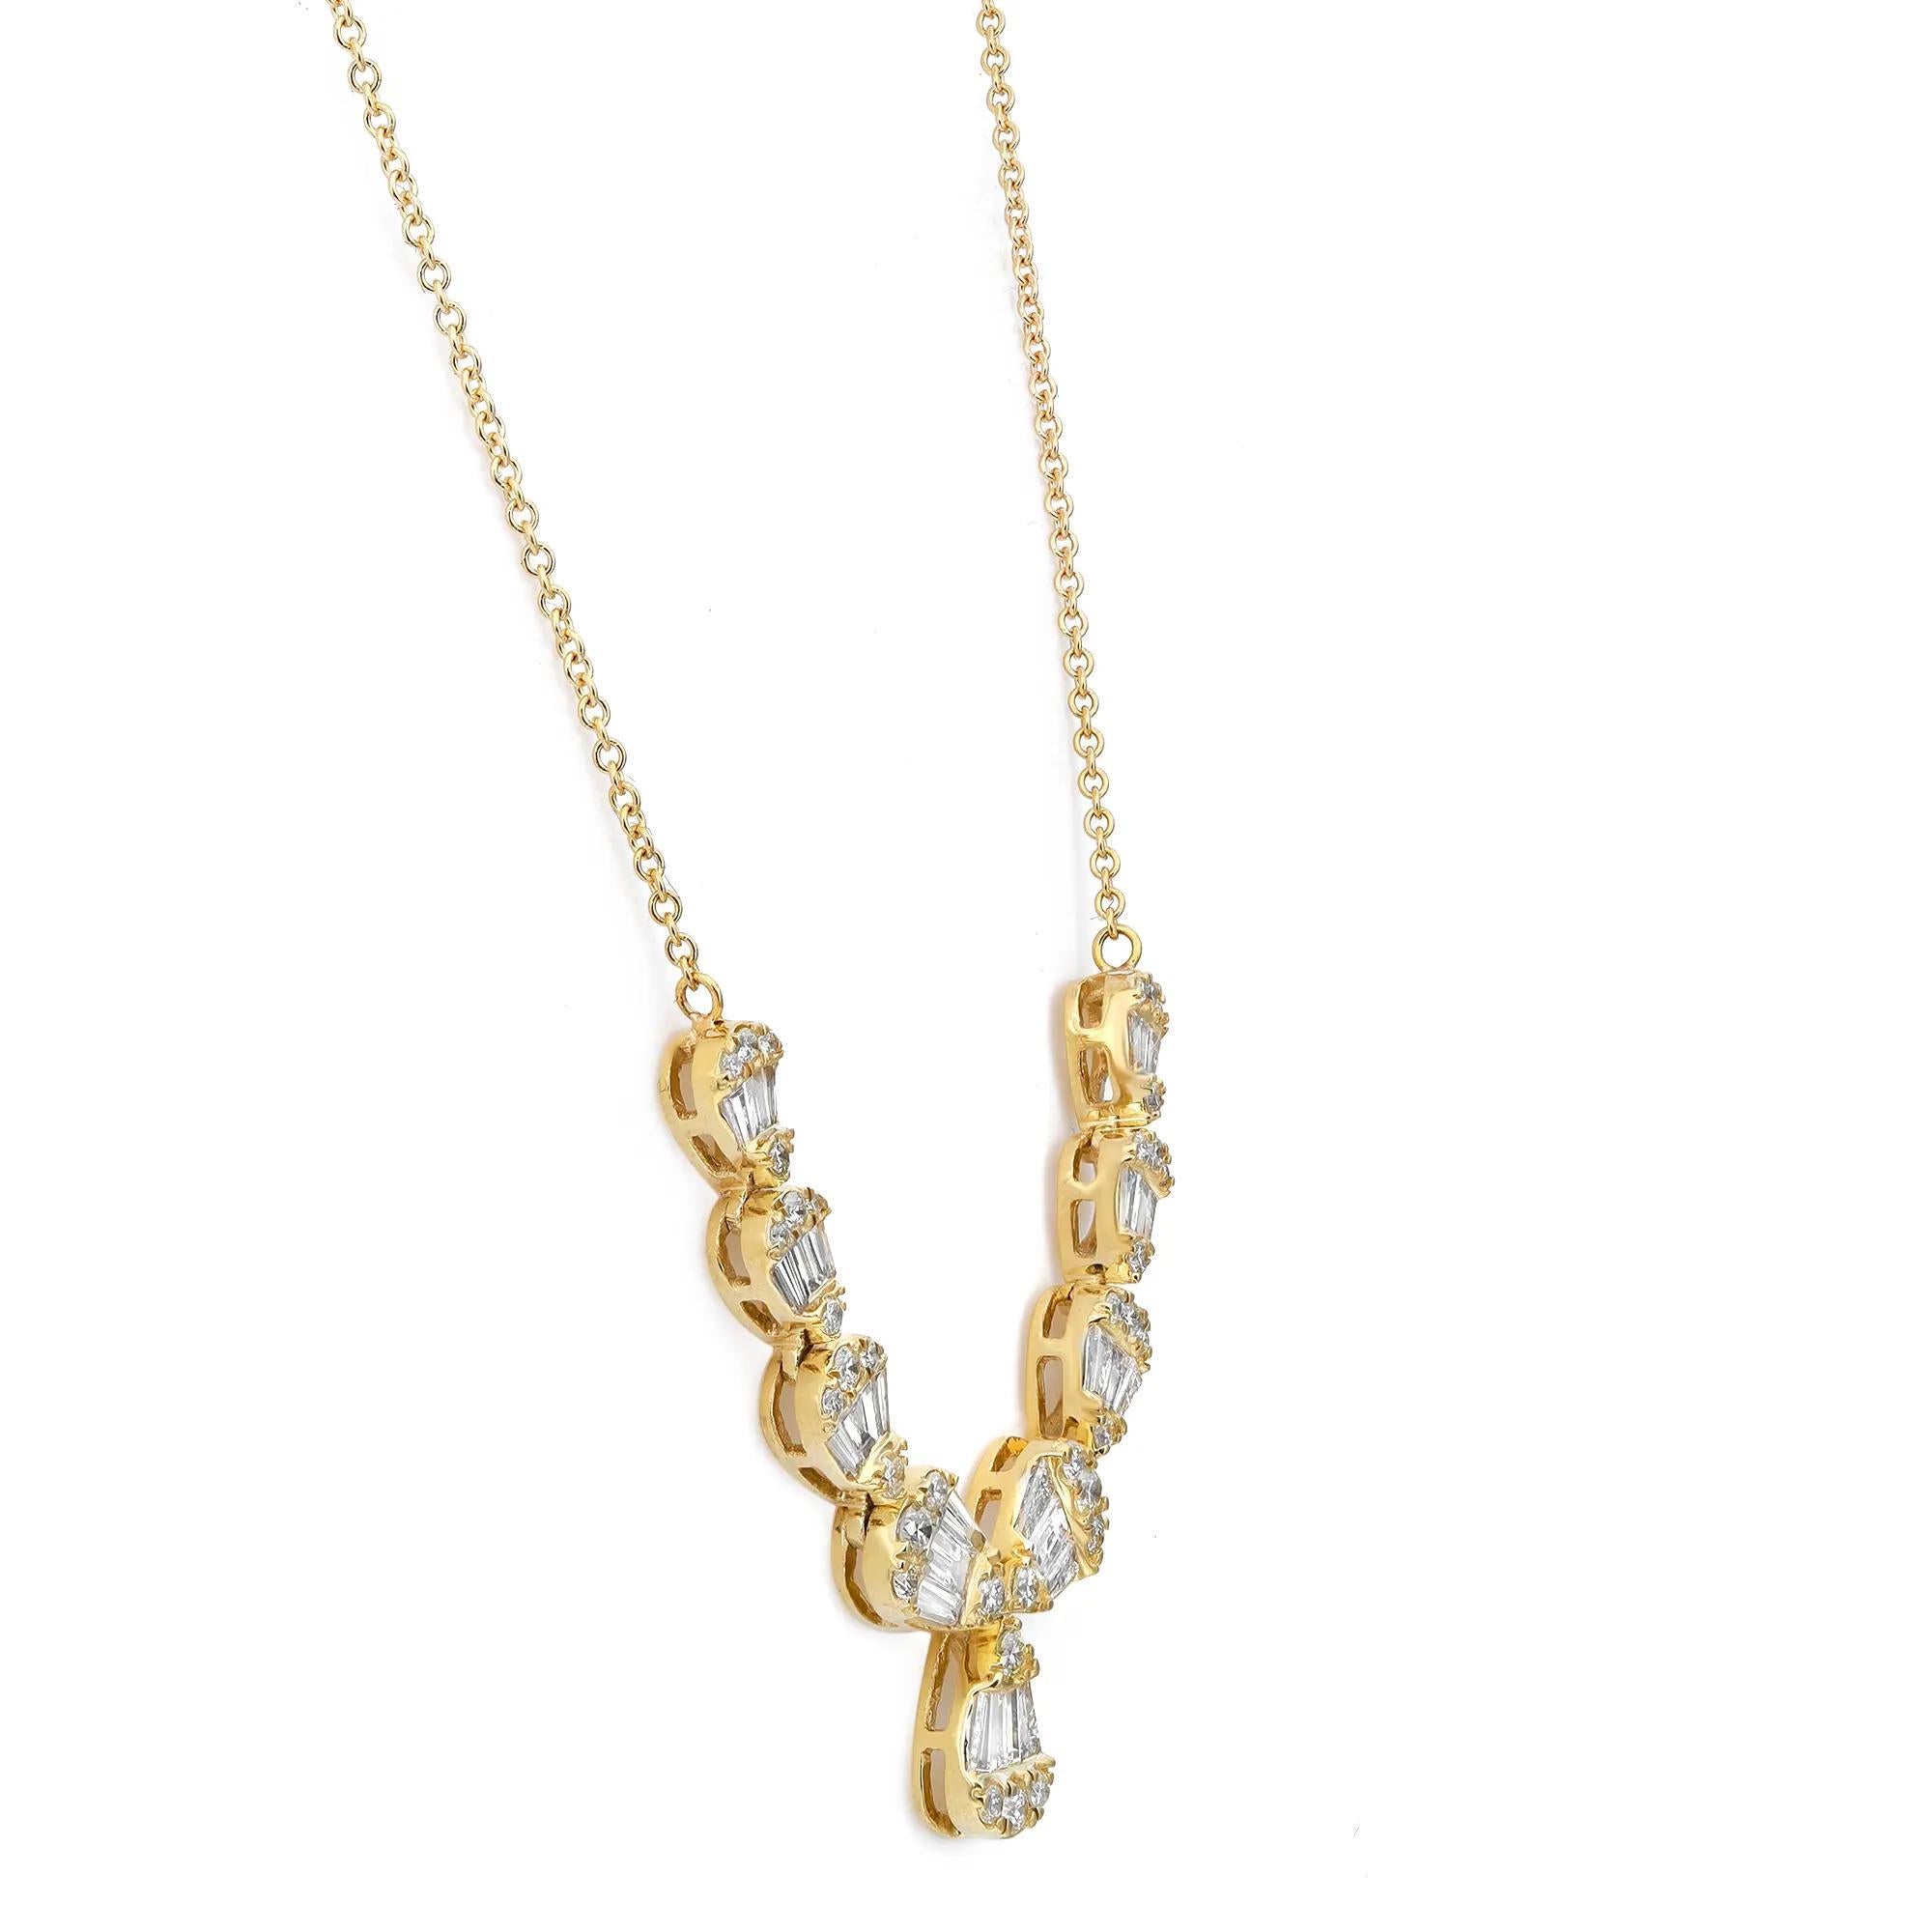 Bask in brilliance with this alluring diamond bar drop necklace. Crafted in 14K yellow gold, this necklace features nine pear shaped shanks in graduation, studded with channel set baguette cut and prong set round brilliant cut diamonds. Total